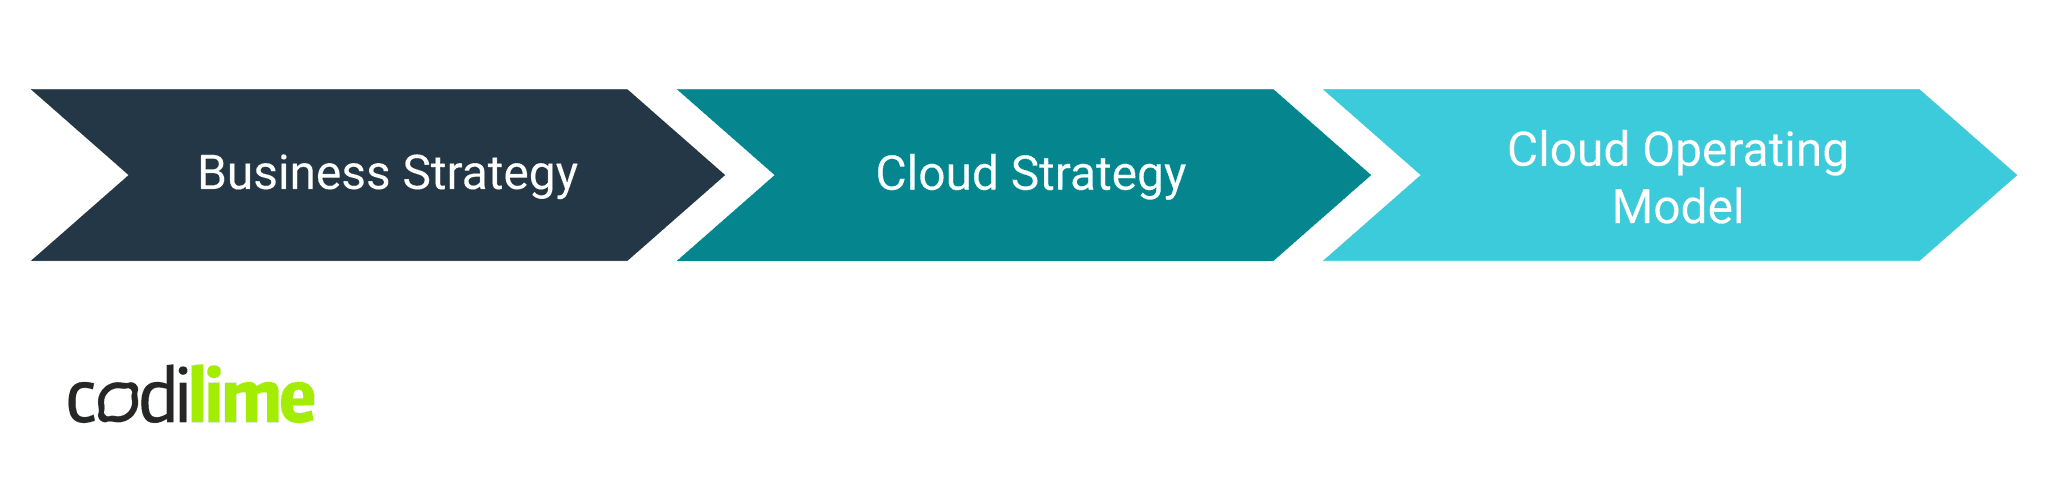 From business strategy to cloud operating model 